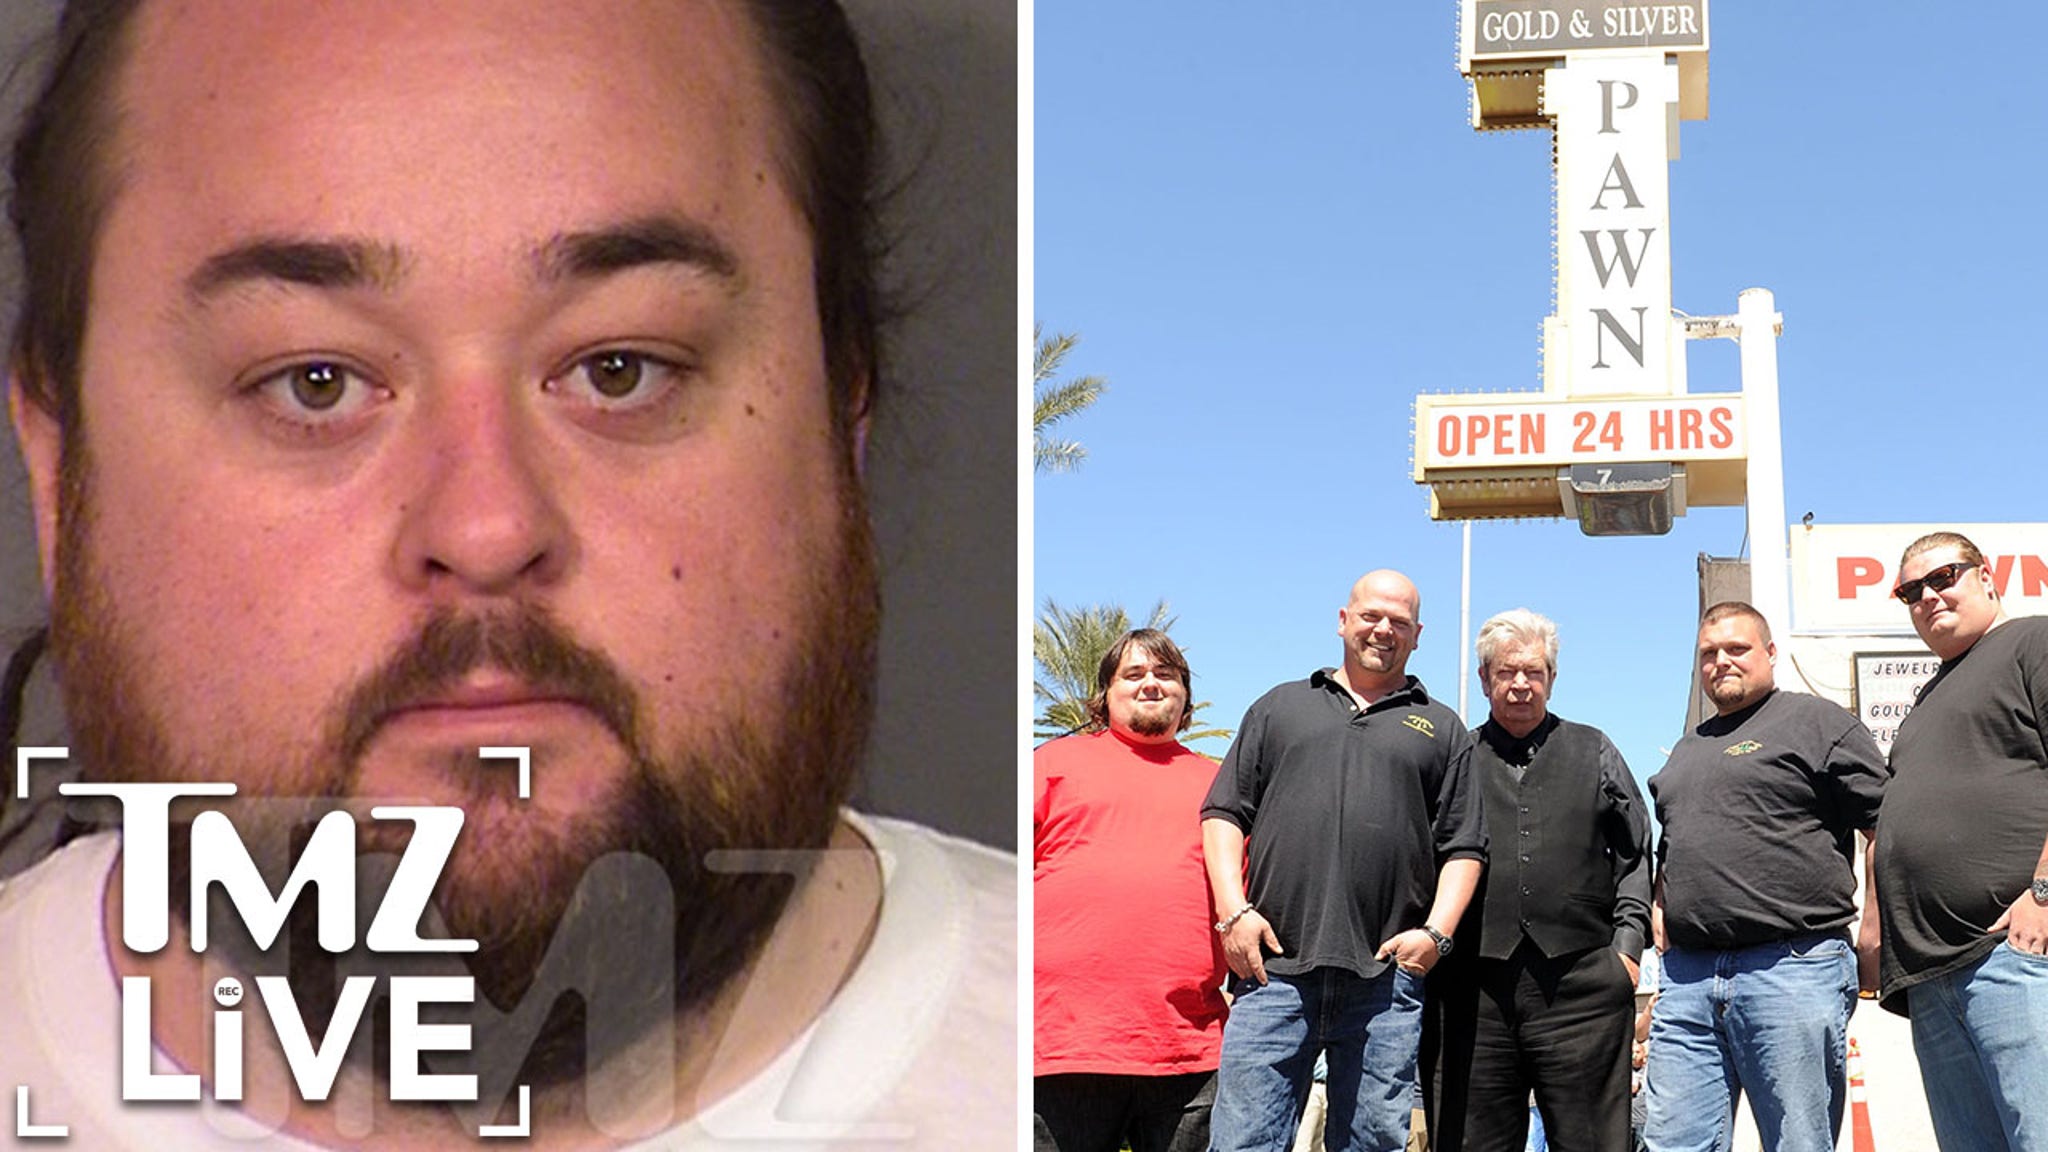 Pawn Stars' Chumlee Arrested During Sexual Assault Raid (TMZ Live)